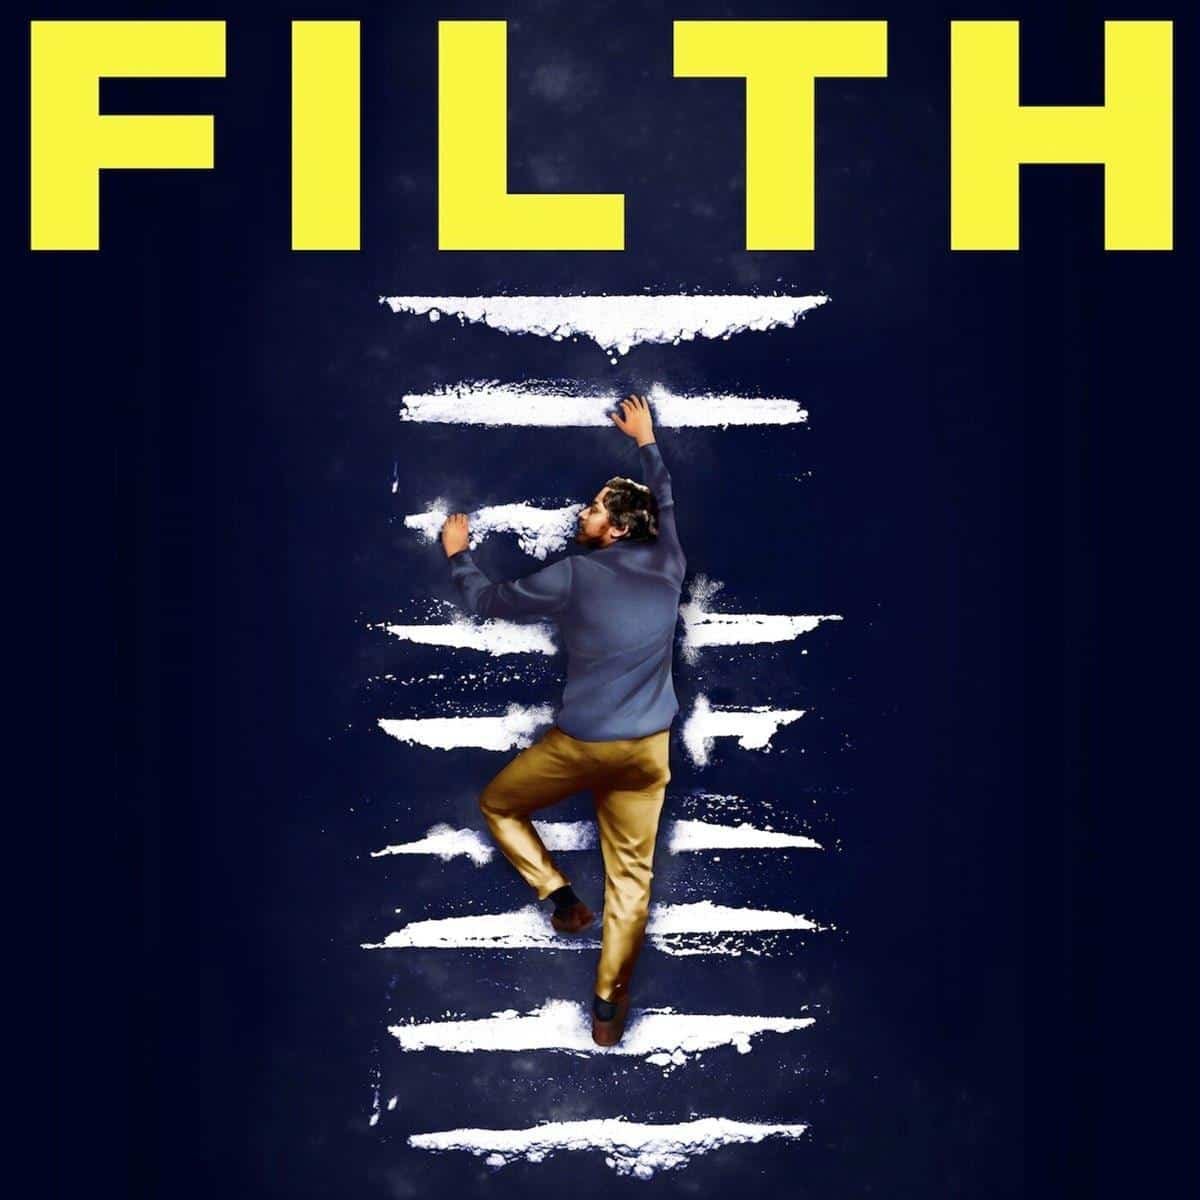 JUST IN! 'Filth - Original Music' by Clint Mansell Clint Mansell’s score to Jon S. Baird's film adaptation of Irvine Welsh's ‘Filth’ returns. @iamclintmansell @jonsbaird normanrecords.com/records/142979…